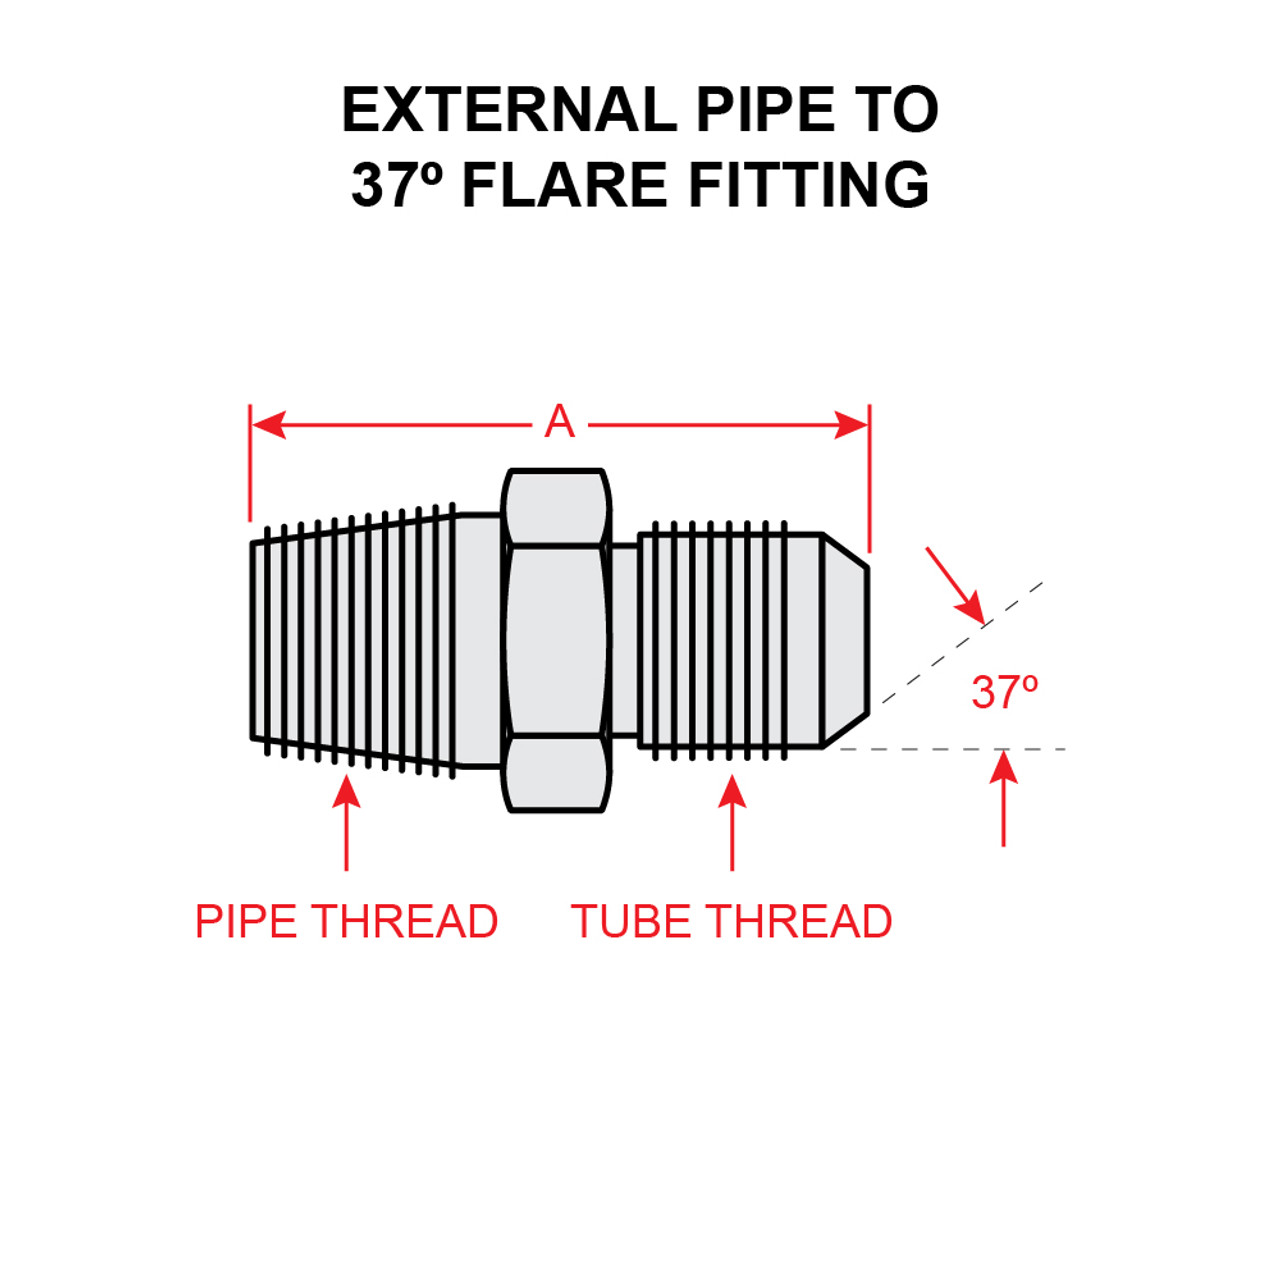 2021-4-8   EXTERNAL PIPE TO 37 DEGREE FLARE FITTING